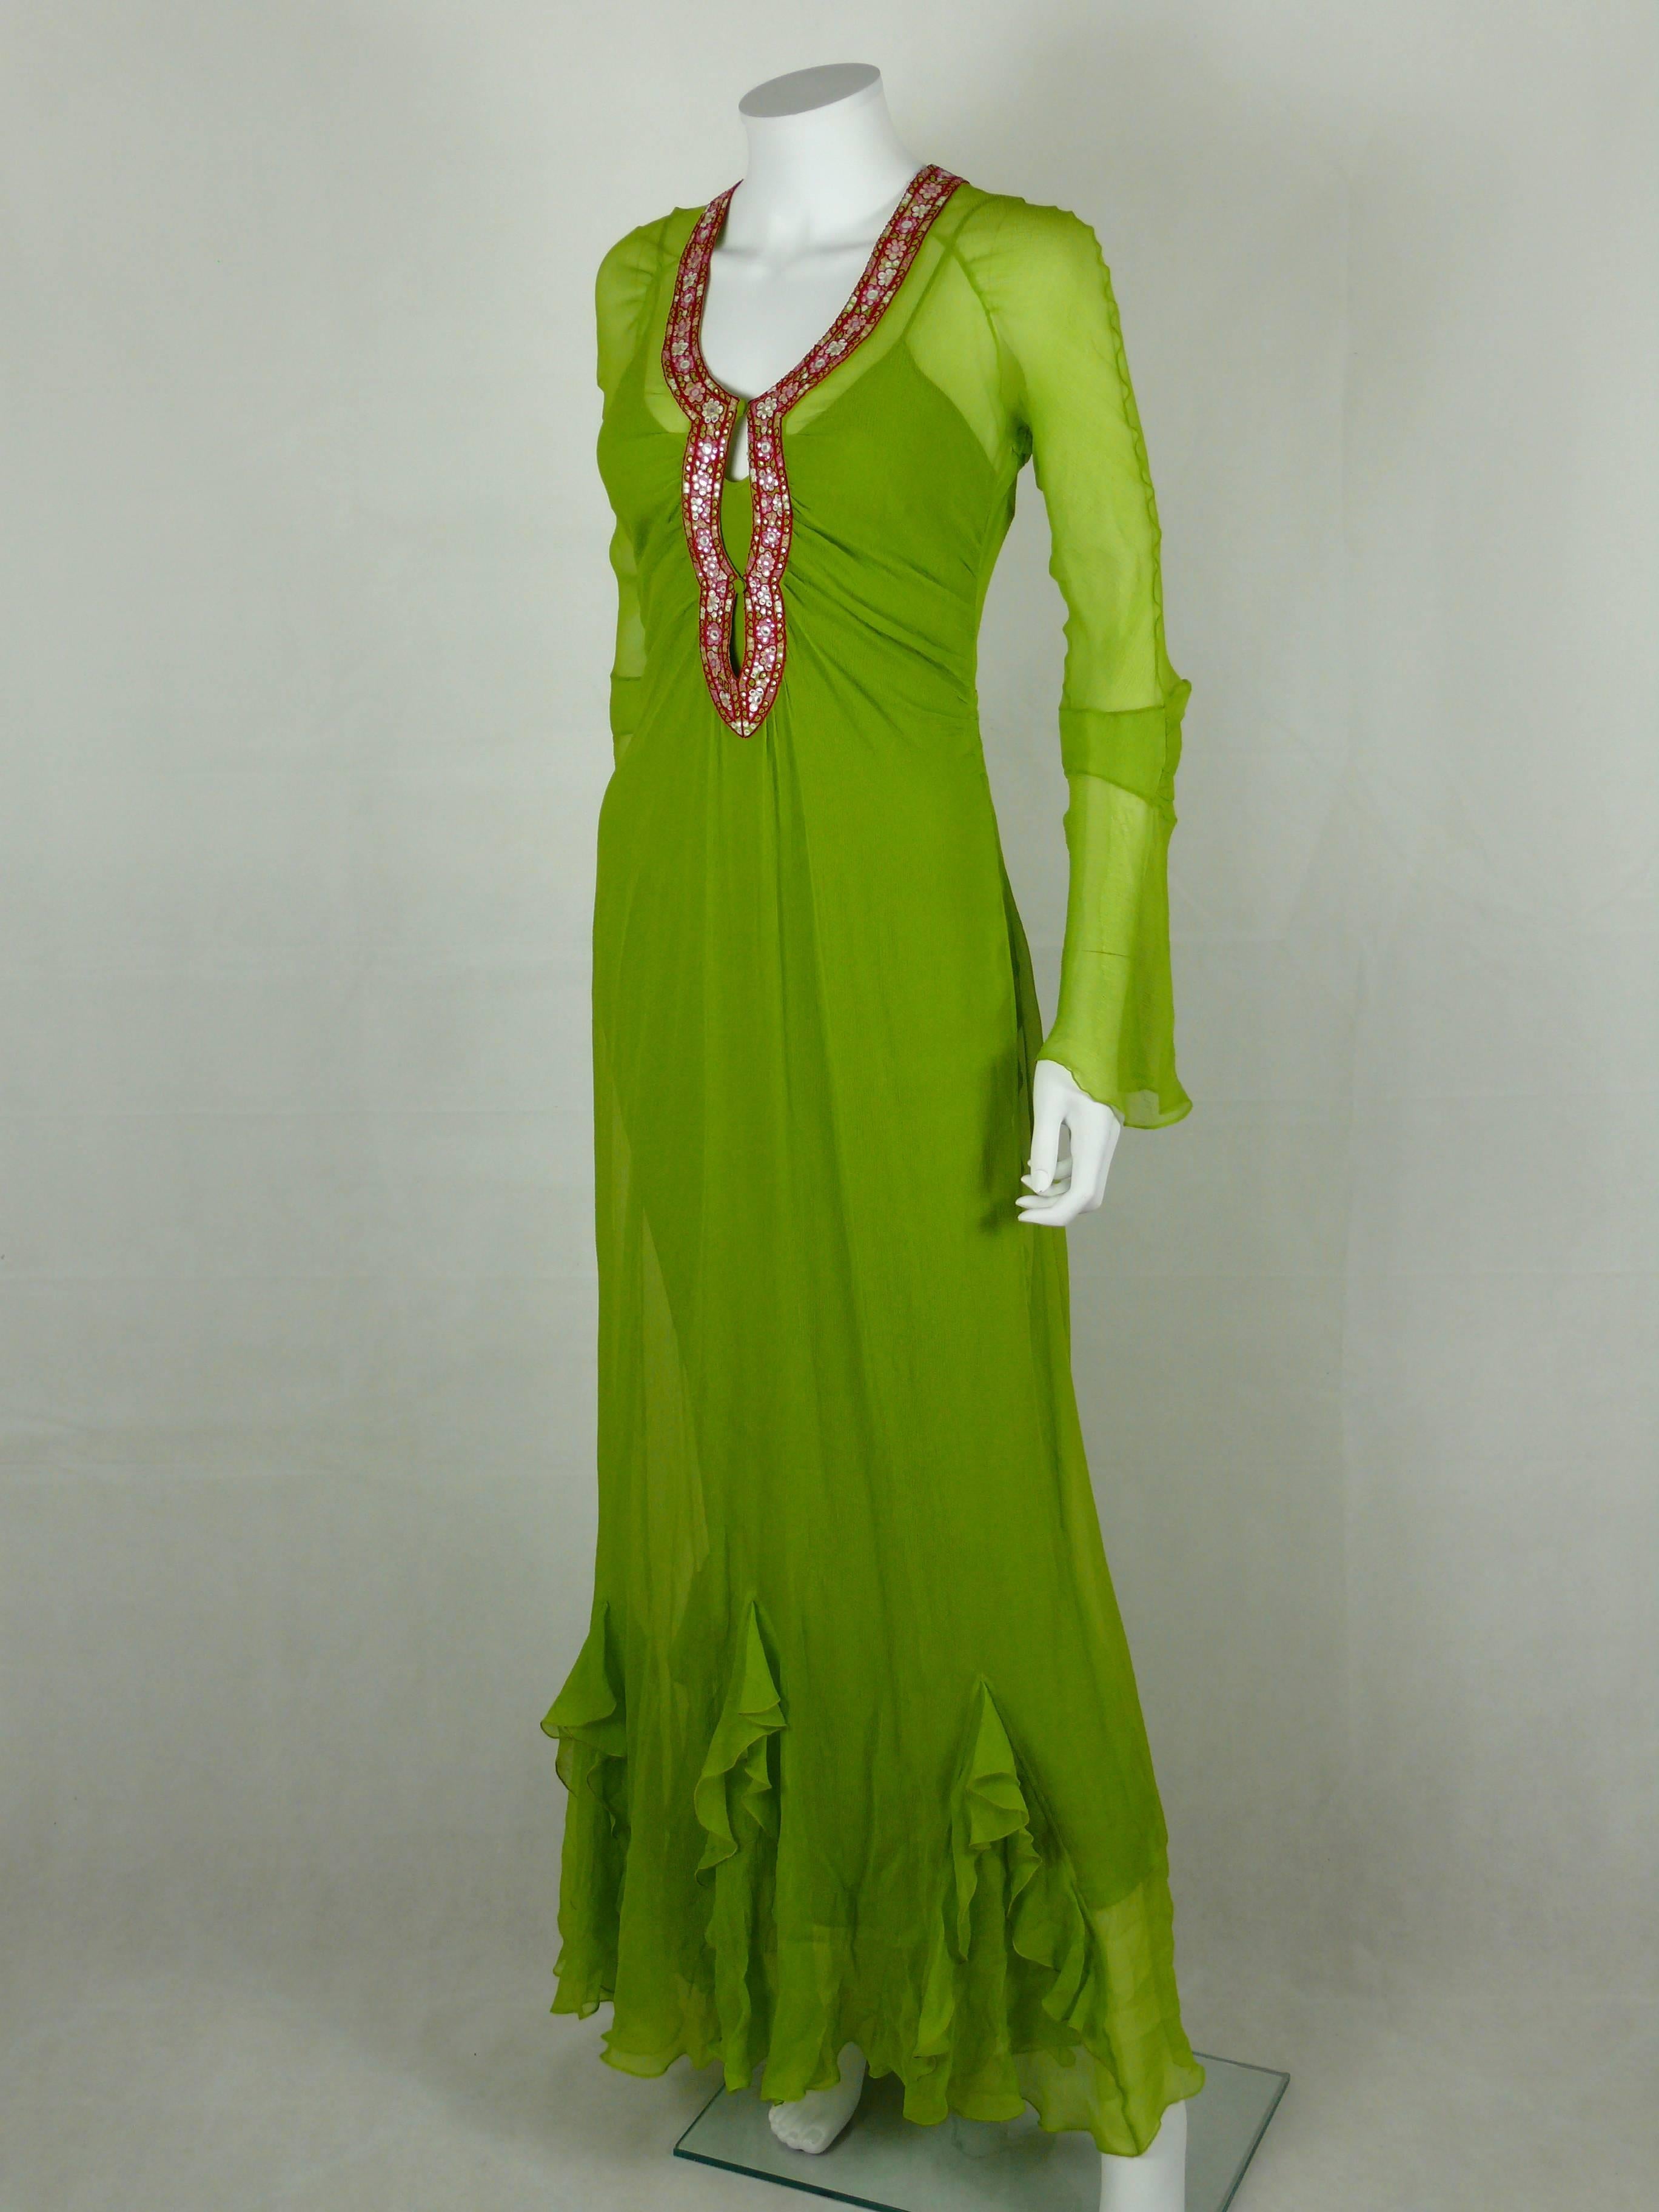 CHRISTIAN DIOR embroidered silk chiffon dress.

This dress is made of green silk chiffon embroidered with an oriental inspired design of stylized flowers with glass pellet embellishement

Silk lining (full length slip).

Beautiful contrast stitching